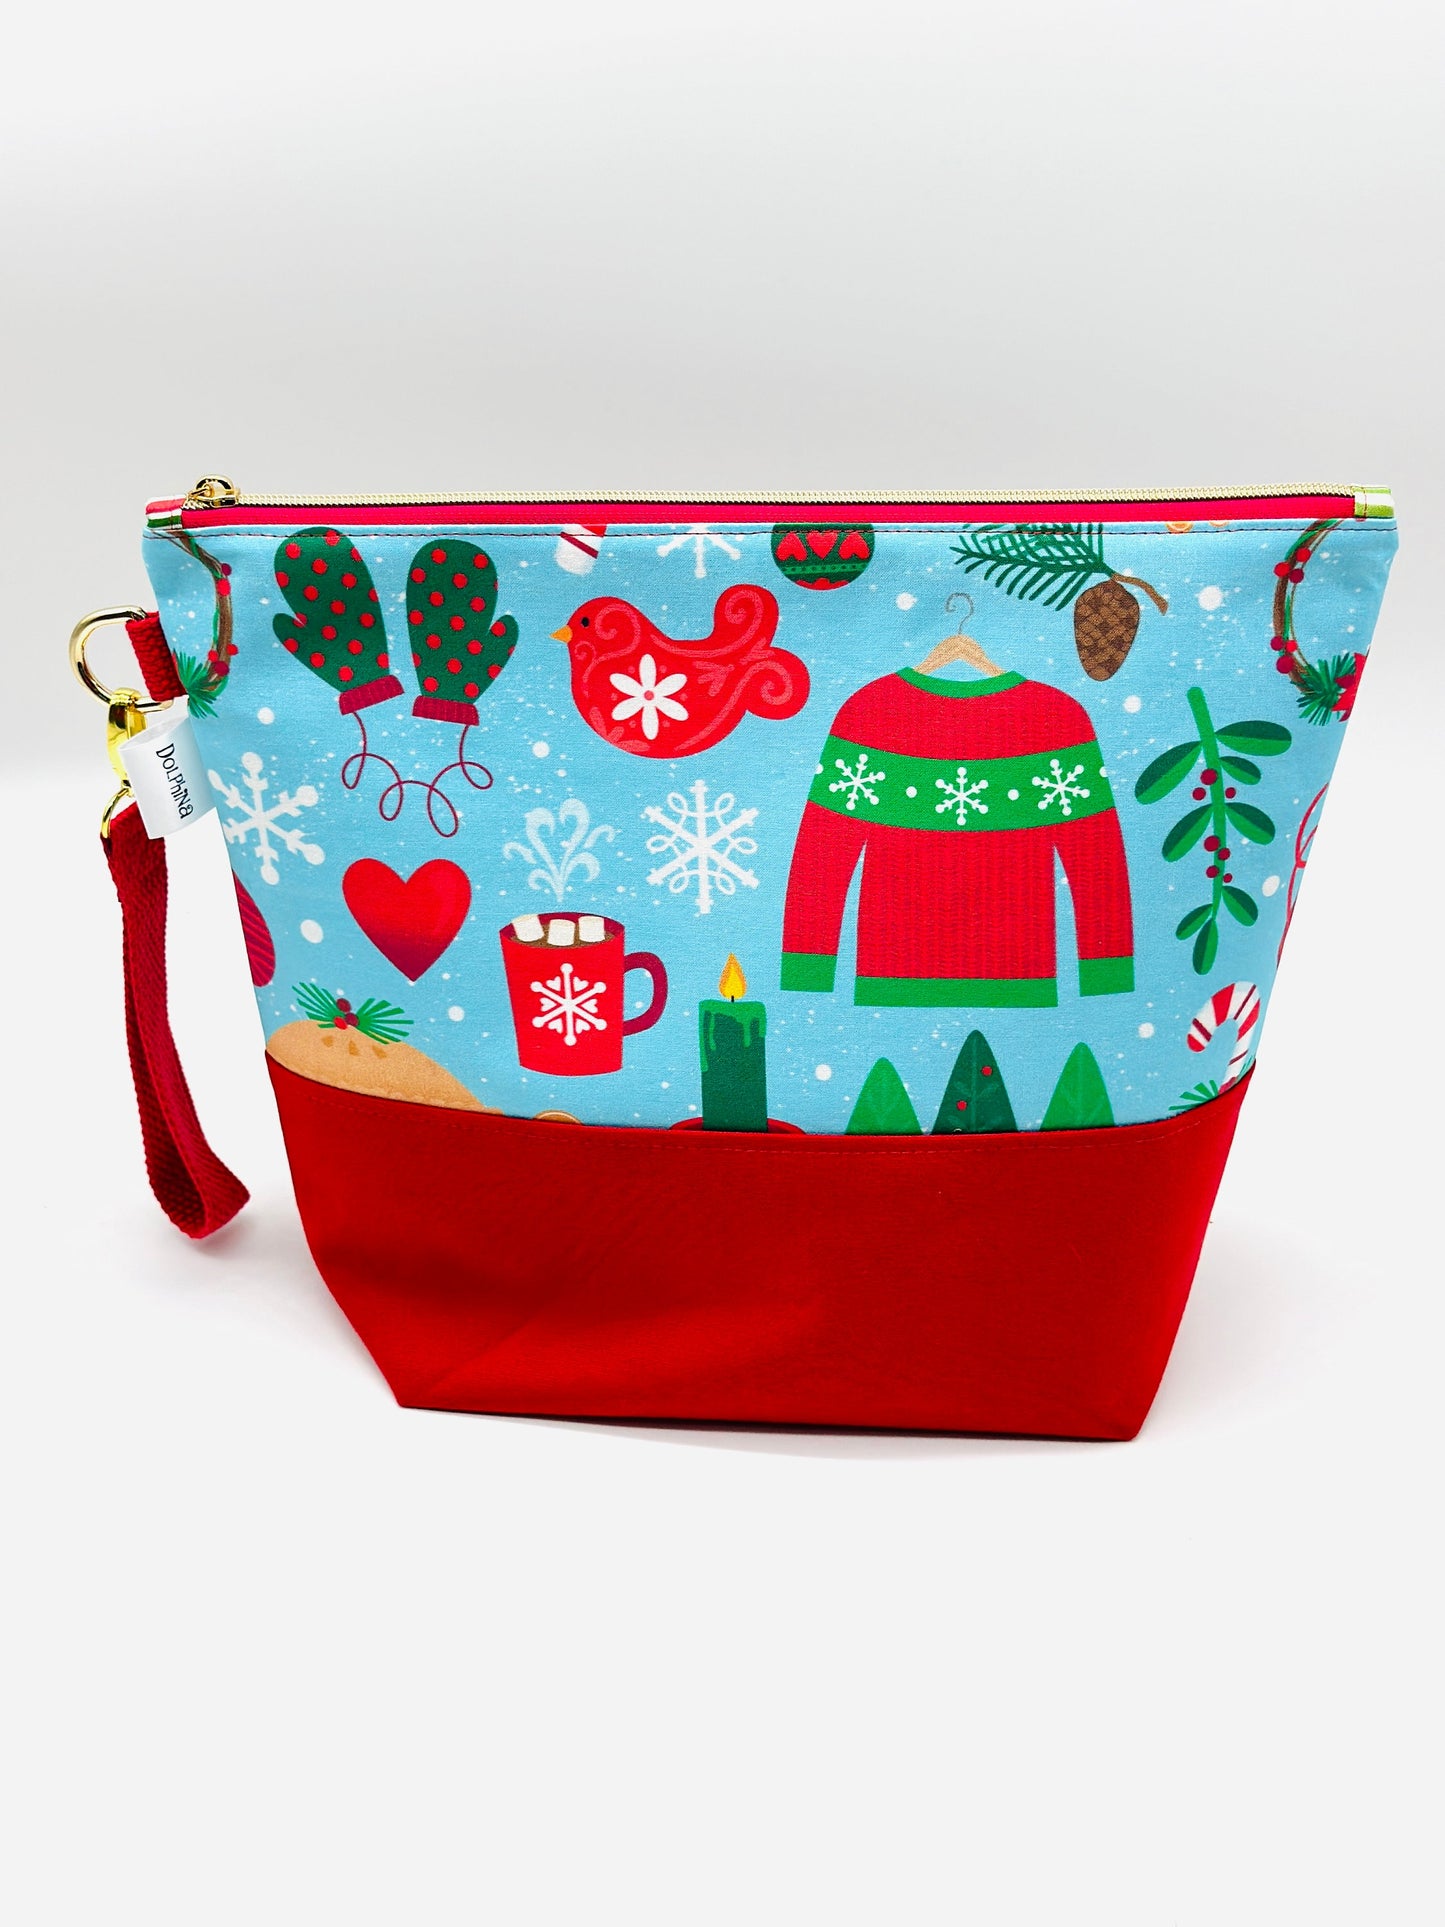 Extra large project bag -  Warm Winter wishes